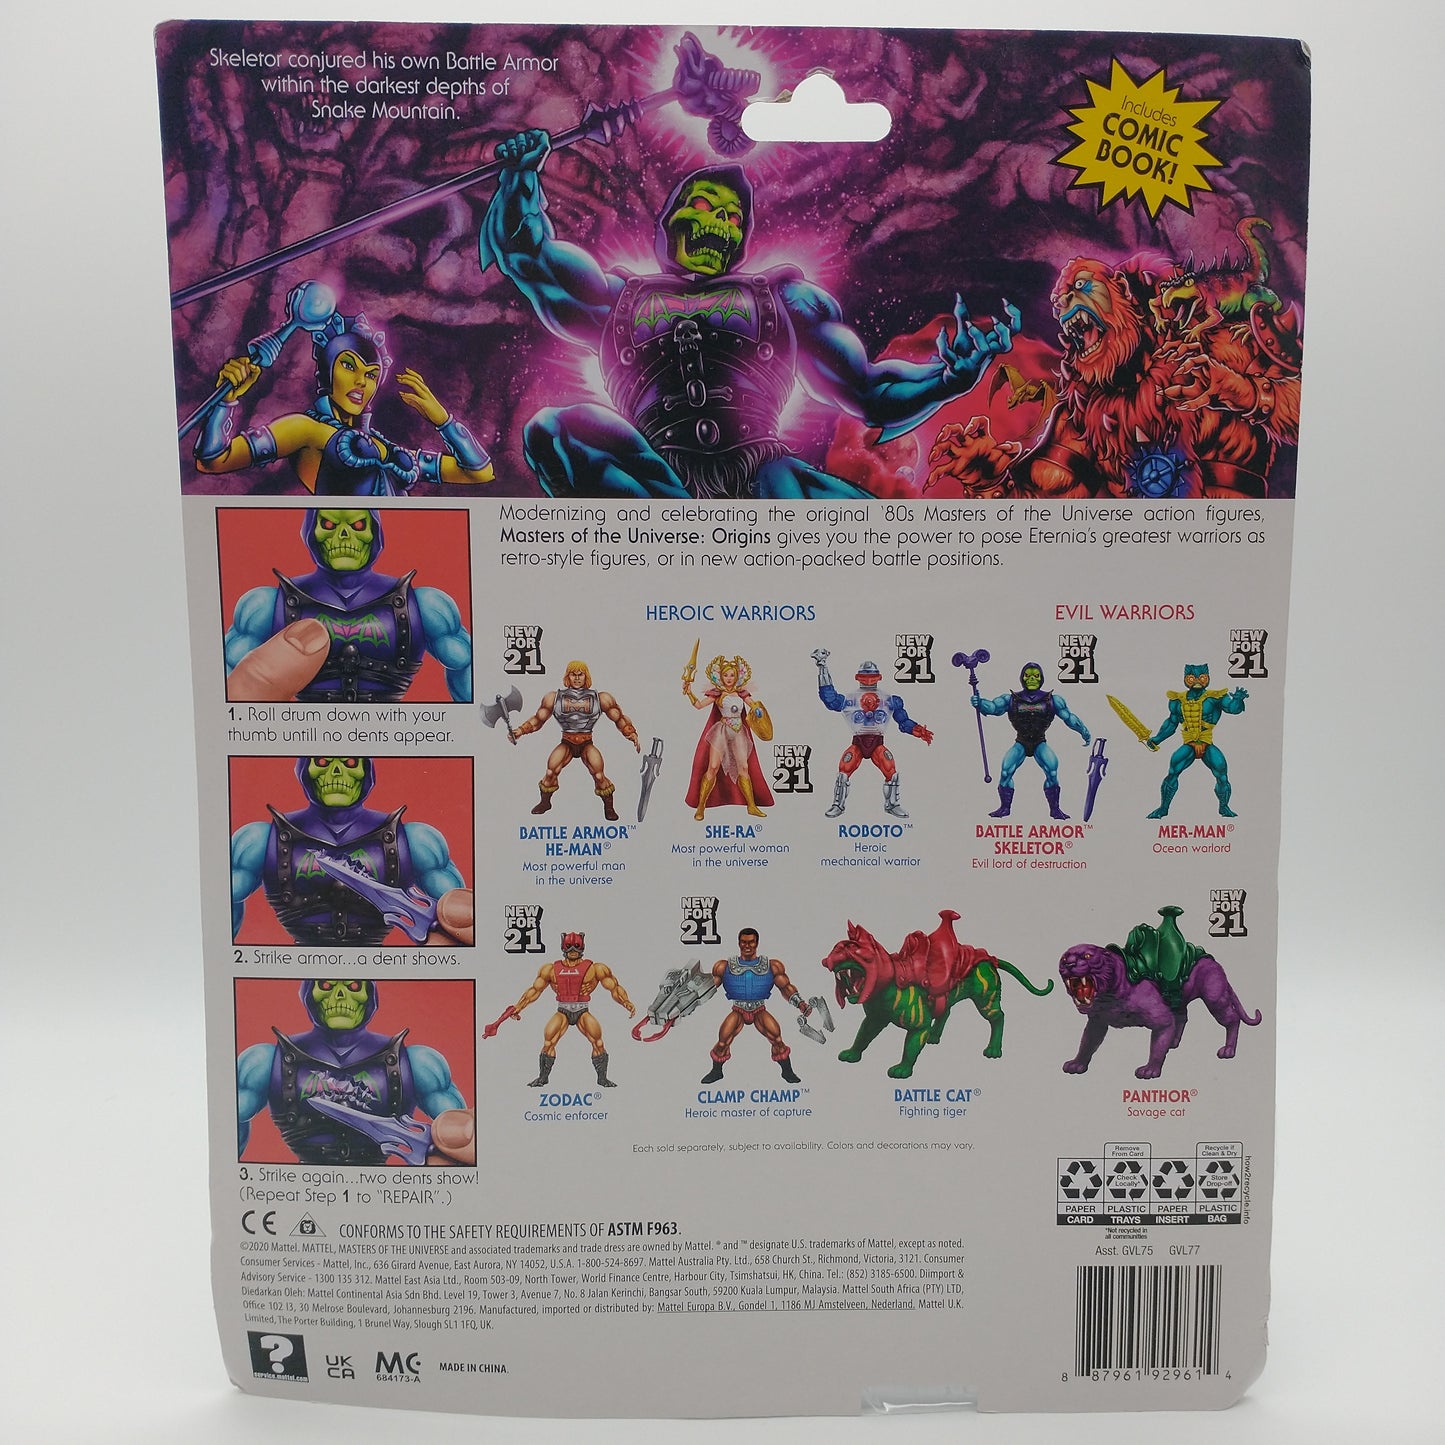  A picture of the back of the card featuring pictures of other action figures available along with various playsets available for purchase. 